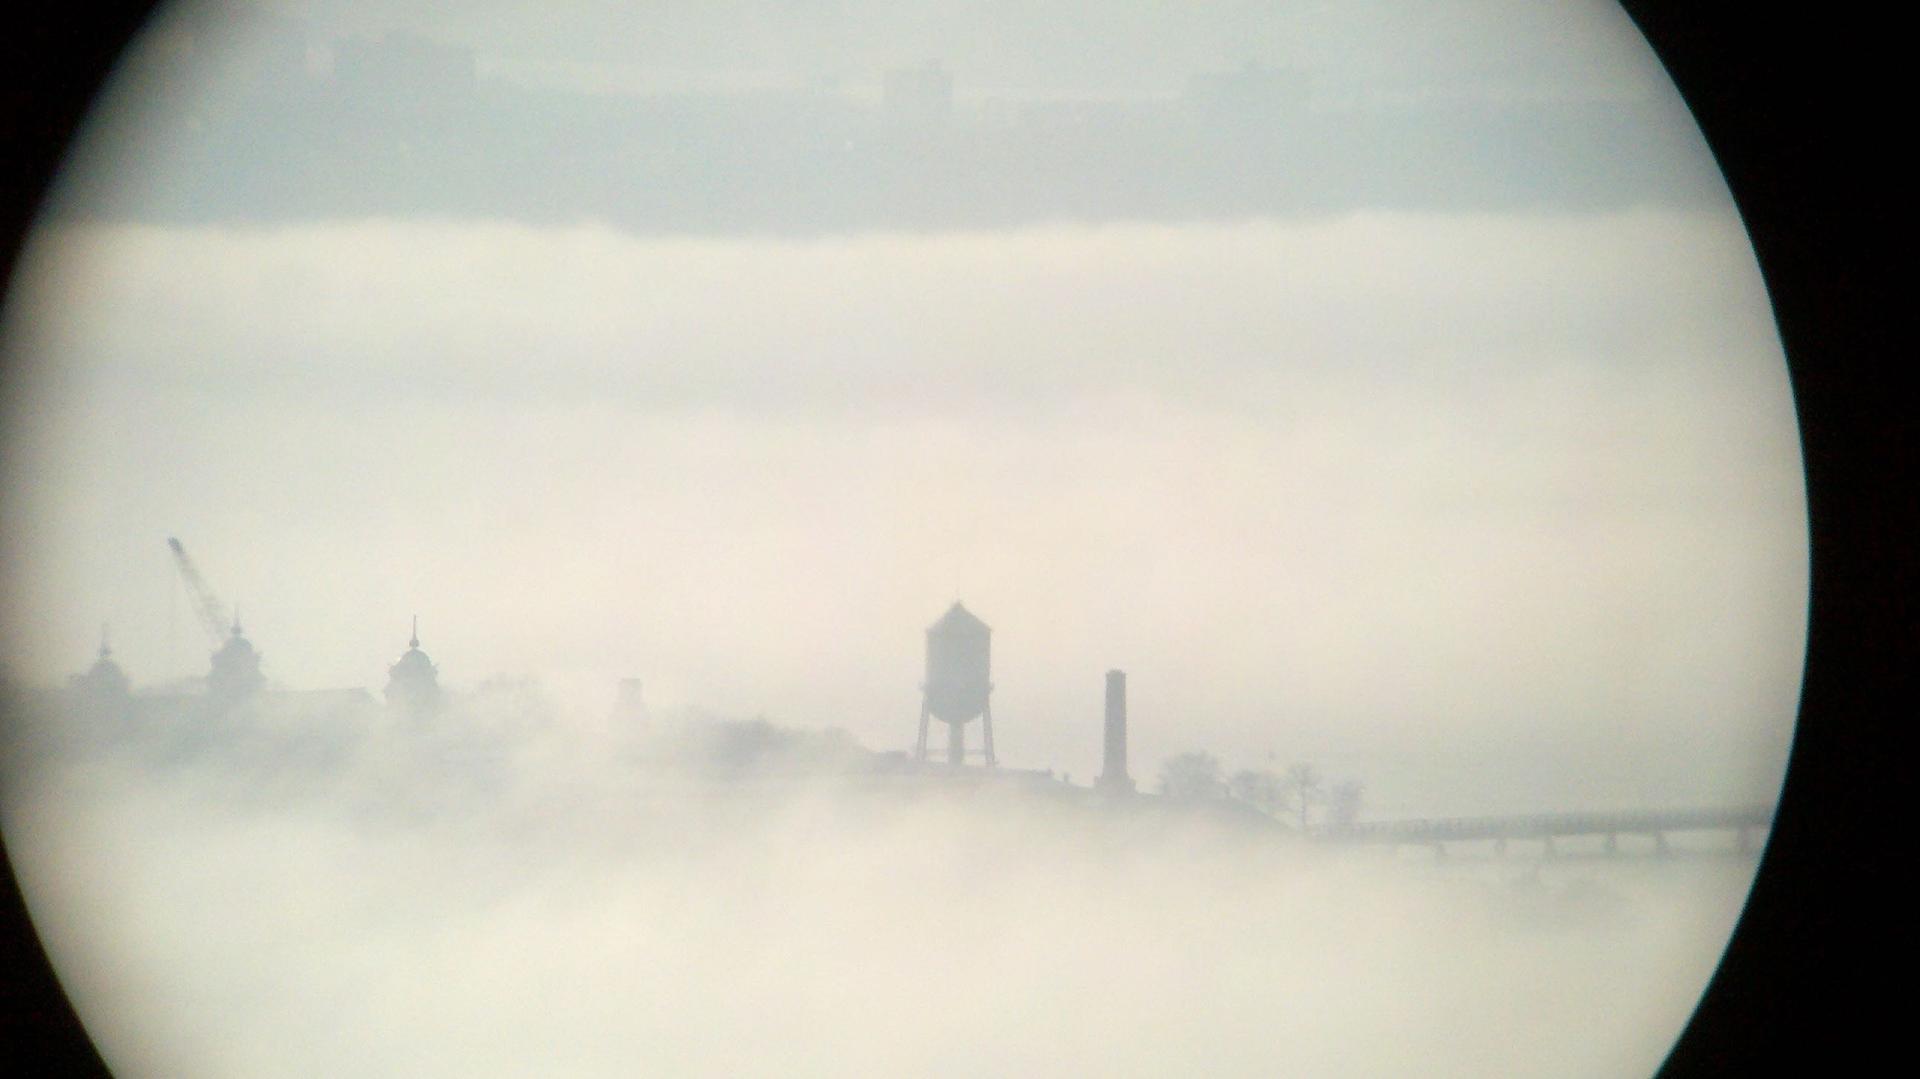 Ellis Island — which once welcomed millions of immigrants to the US — is pictured here shrouded in fog. 